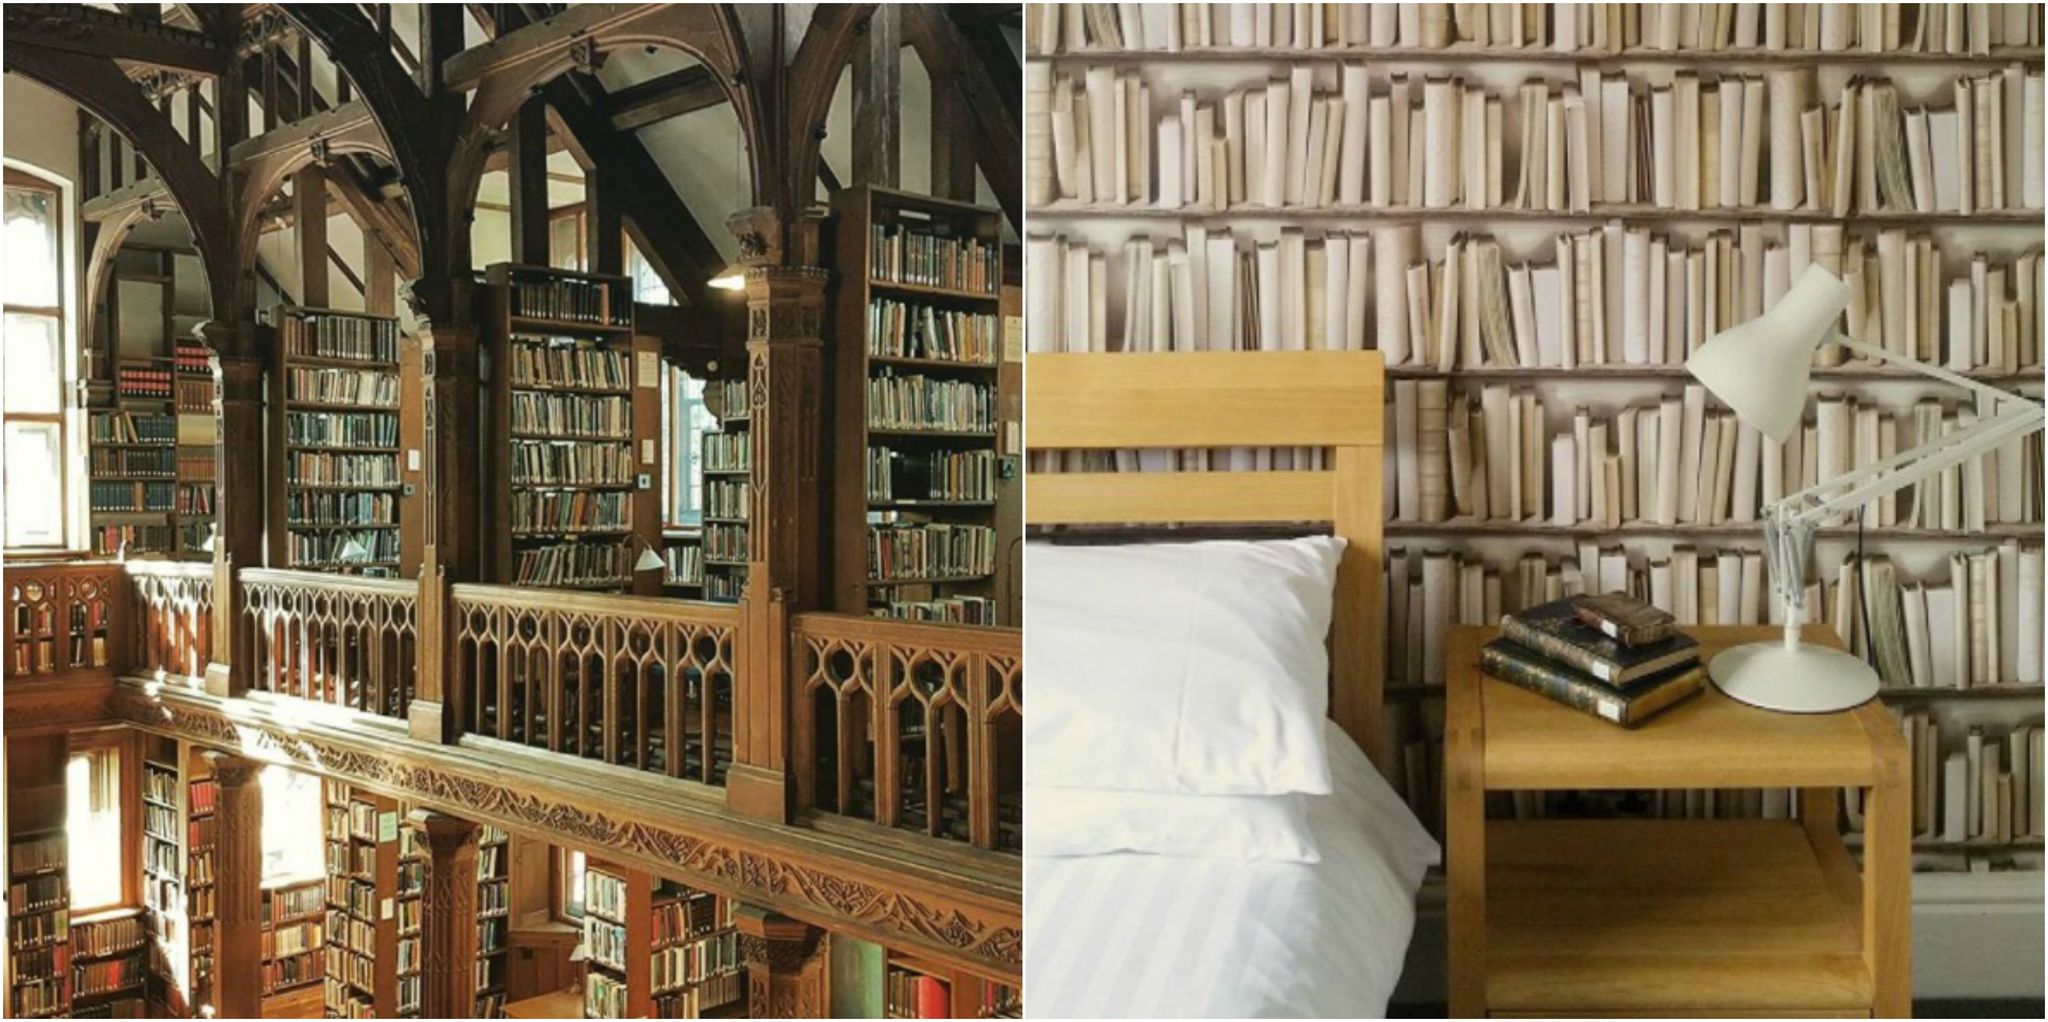 Instagram - Gladstone's Library - Wales